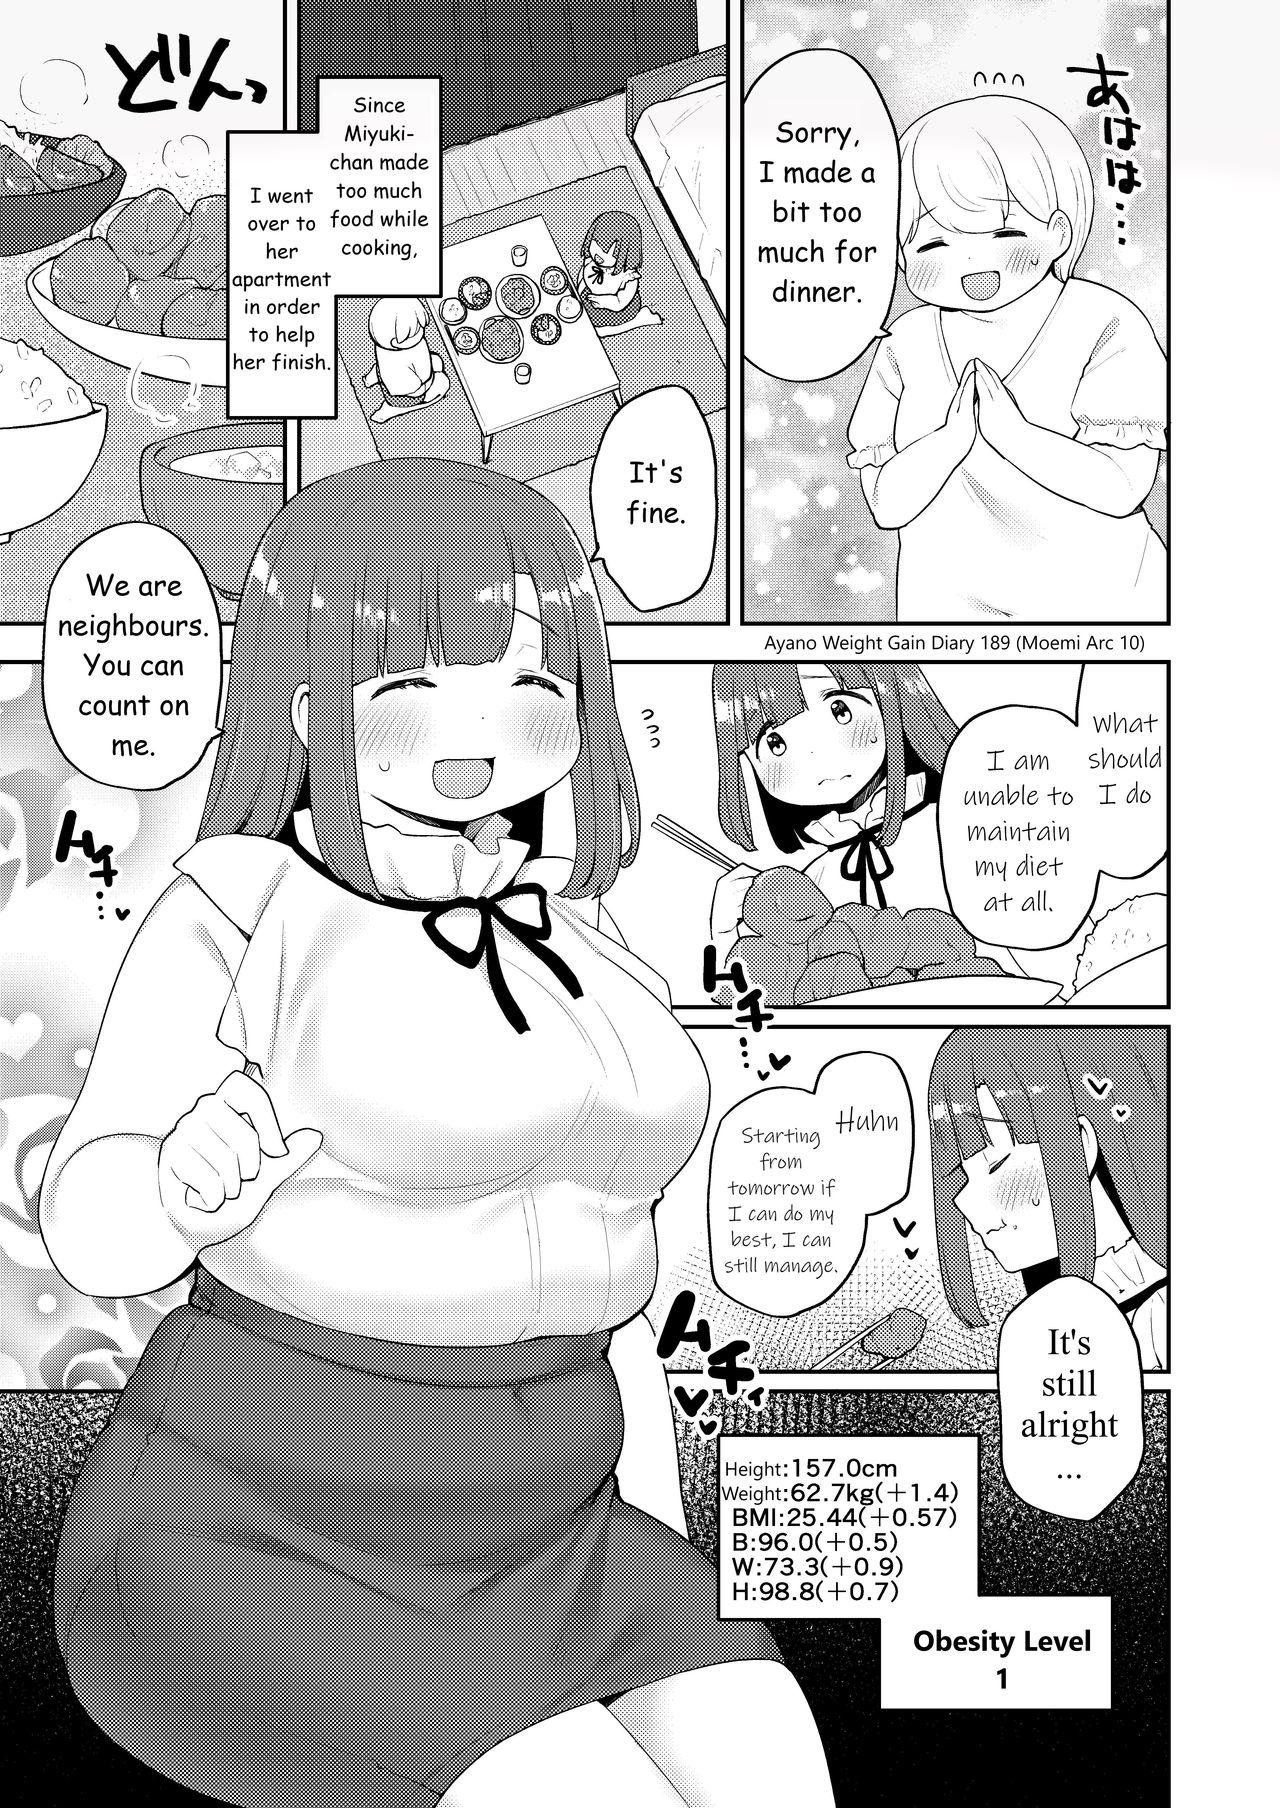 Stepsiblings Ayano's Weight Gain Diary Amature - Page 189